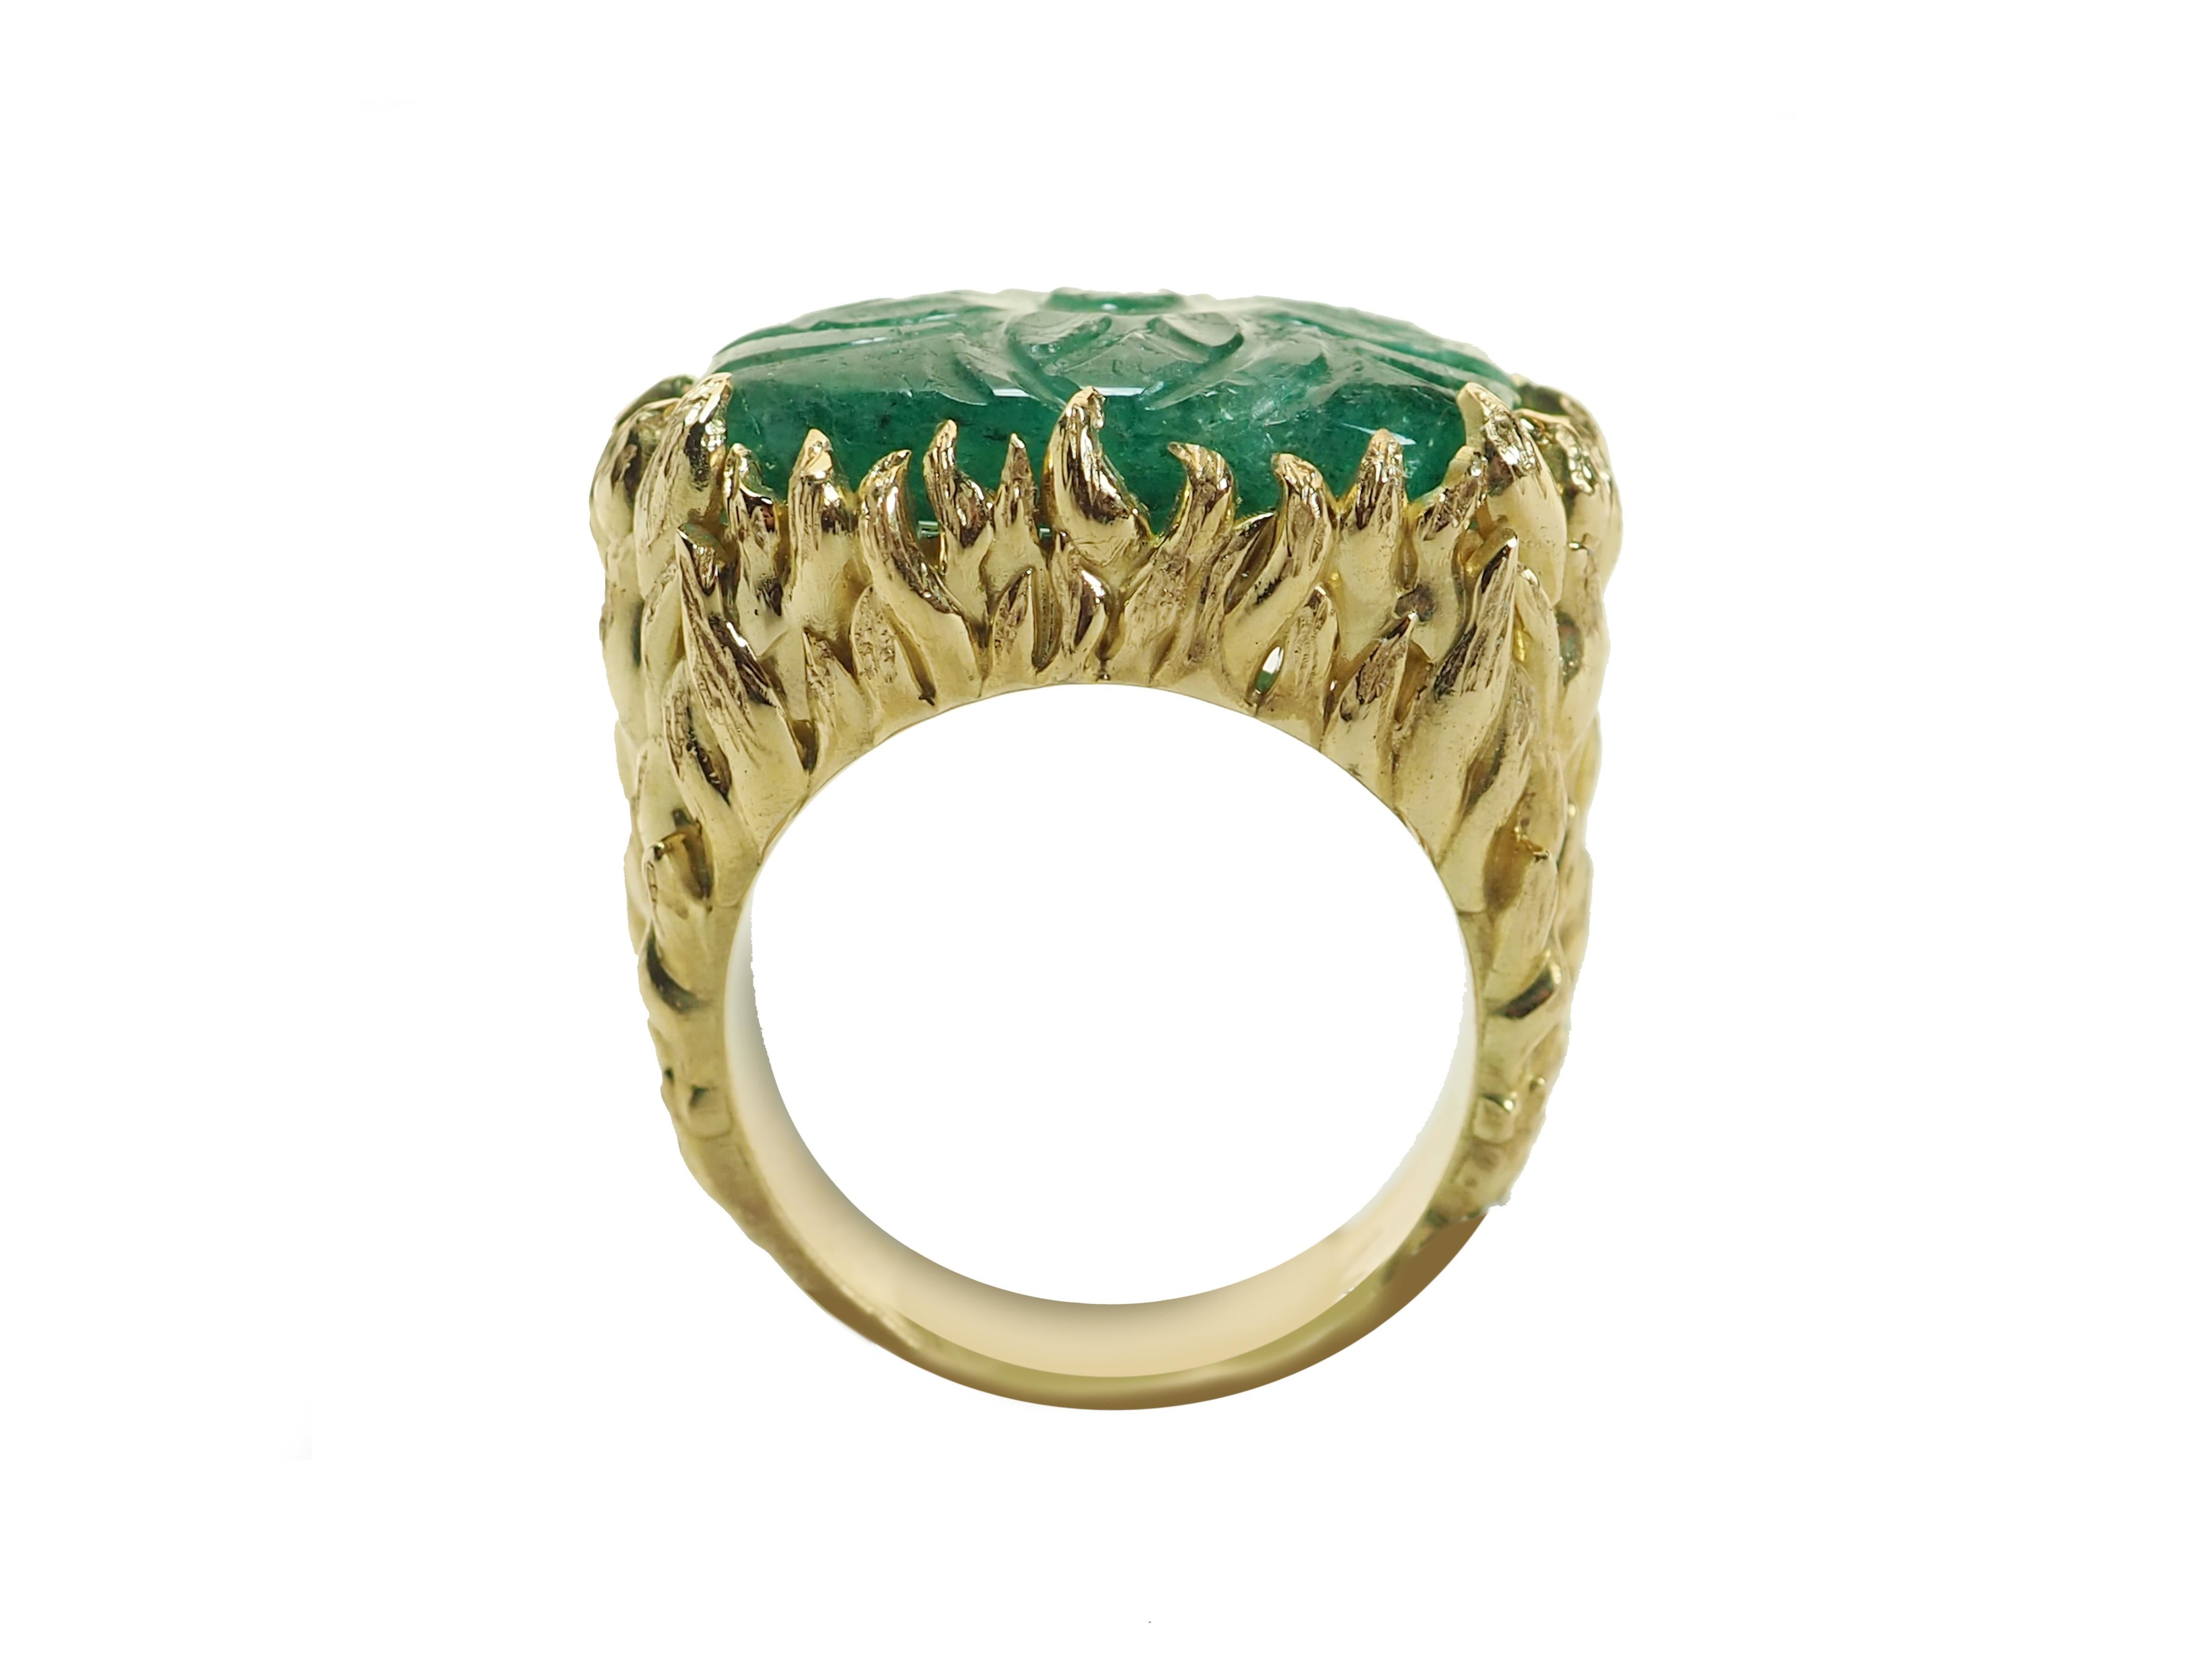 18k Gold  18,30 gr carved flame ring with big square carved  emerald engrave its 2,80.
Size 14 eu.
All Giulia Colussi jewelry is new and has never been previously owned or worn. Each item will arrive at your door beautifully gift wrapped in our